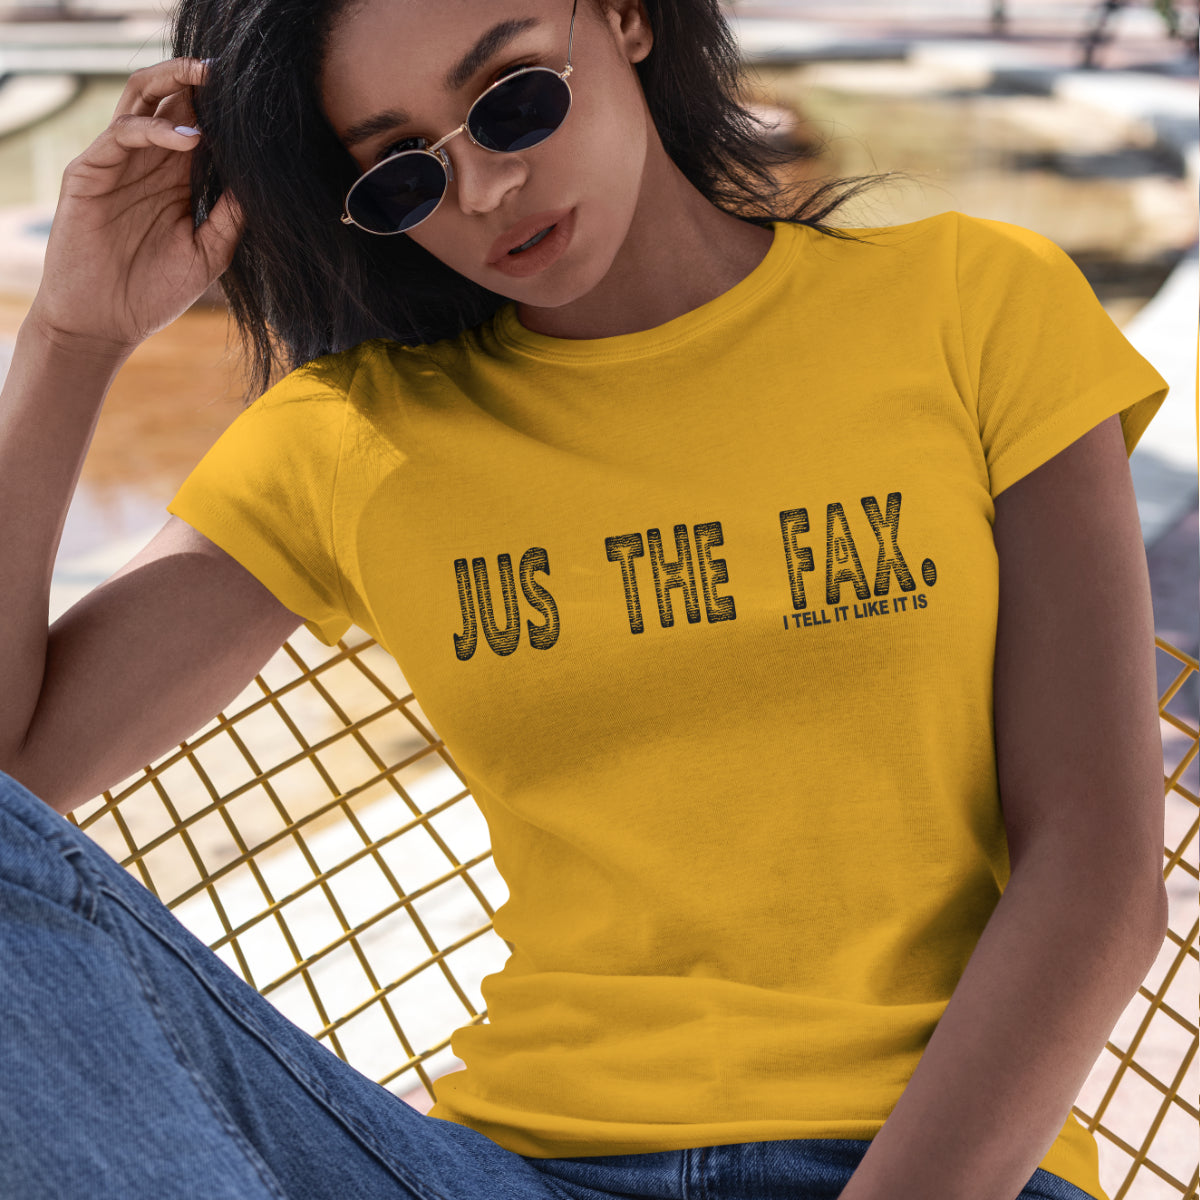 Jus the fax - Tell it like it is - Col rond Coupe femme - T-shirt